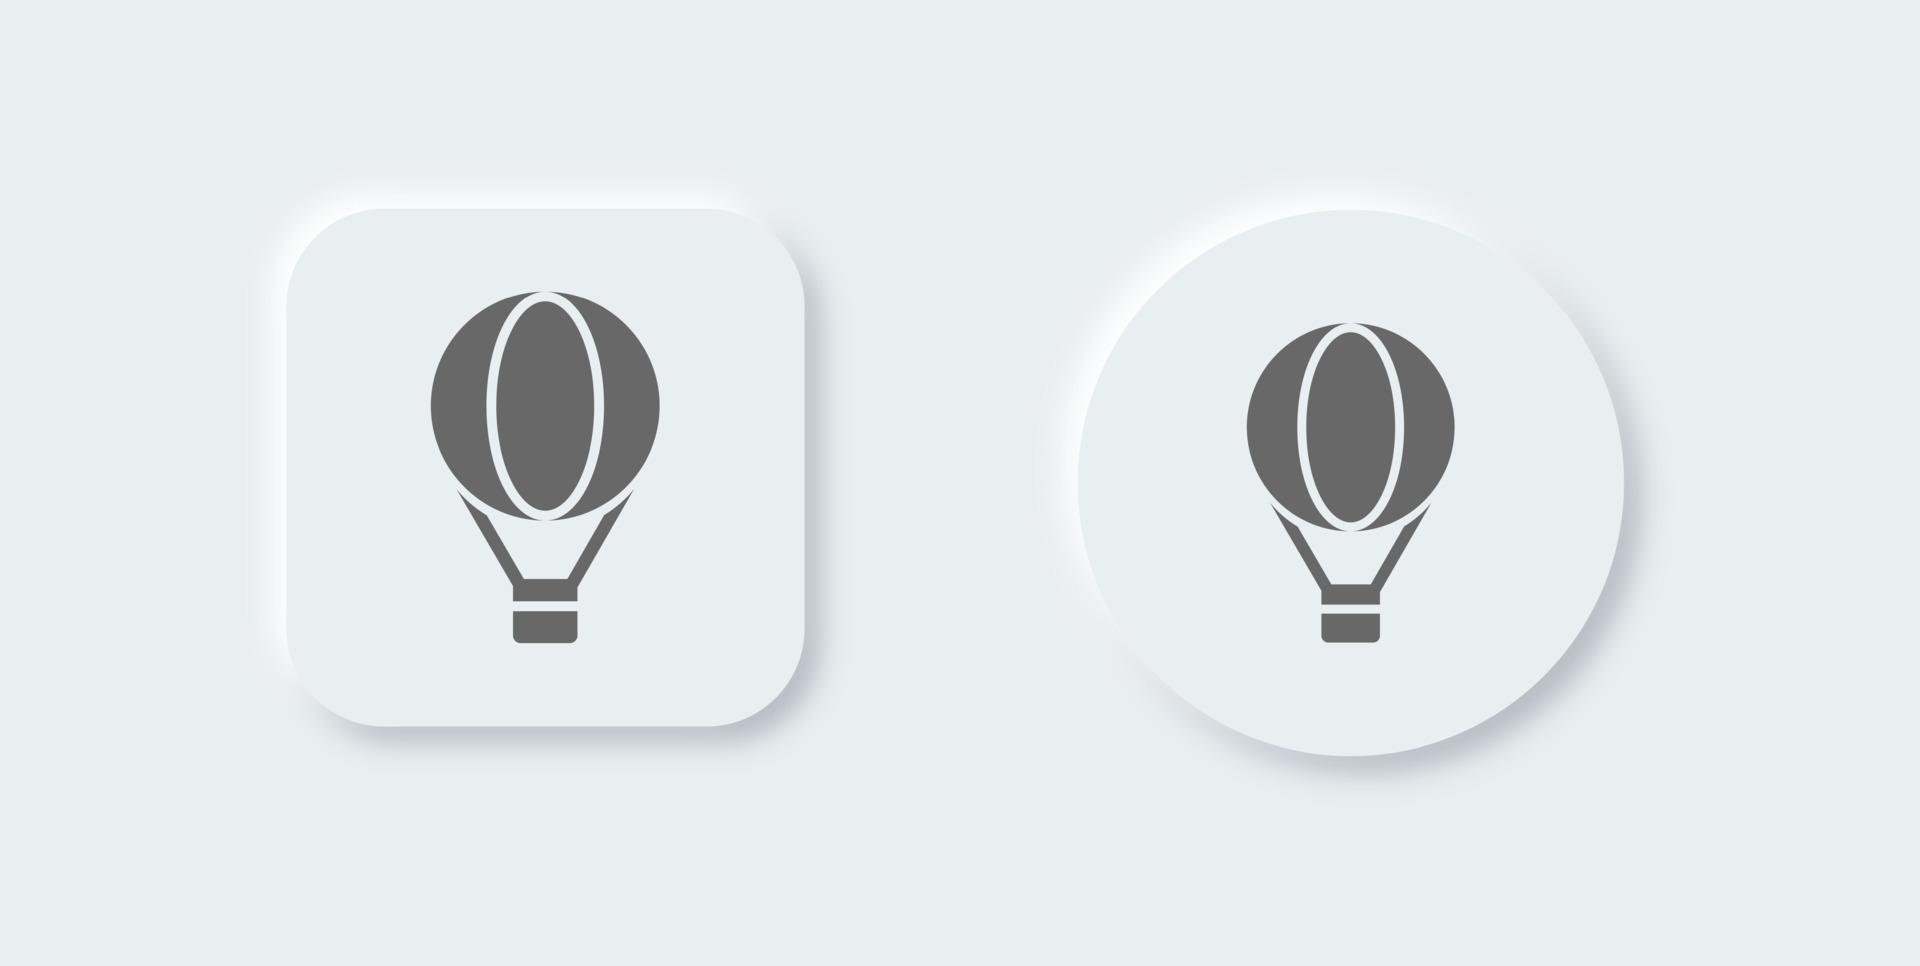 Air balloon solid icon in neomorphic design style. Transportation signs vector illustration.